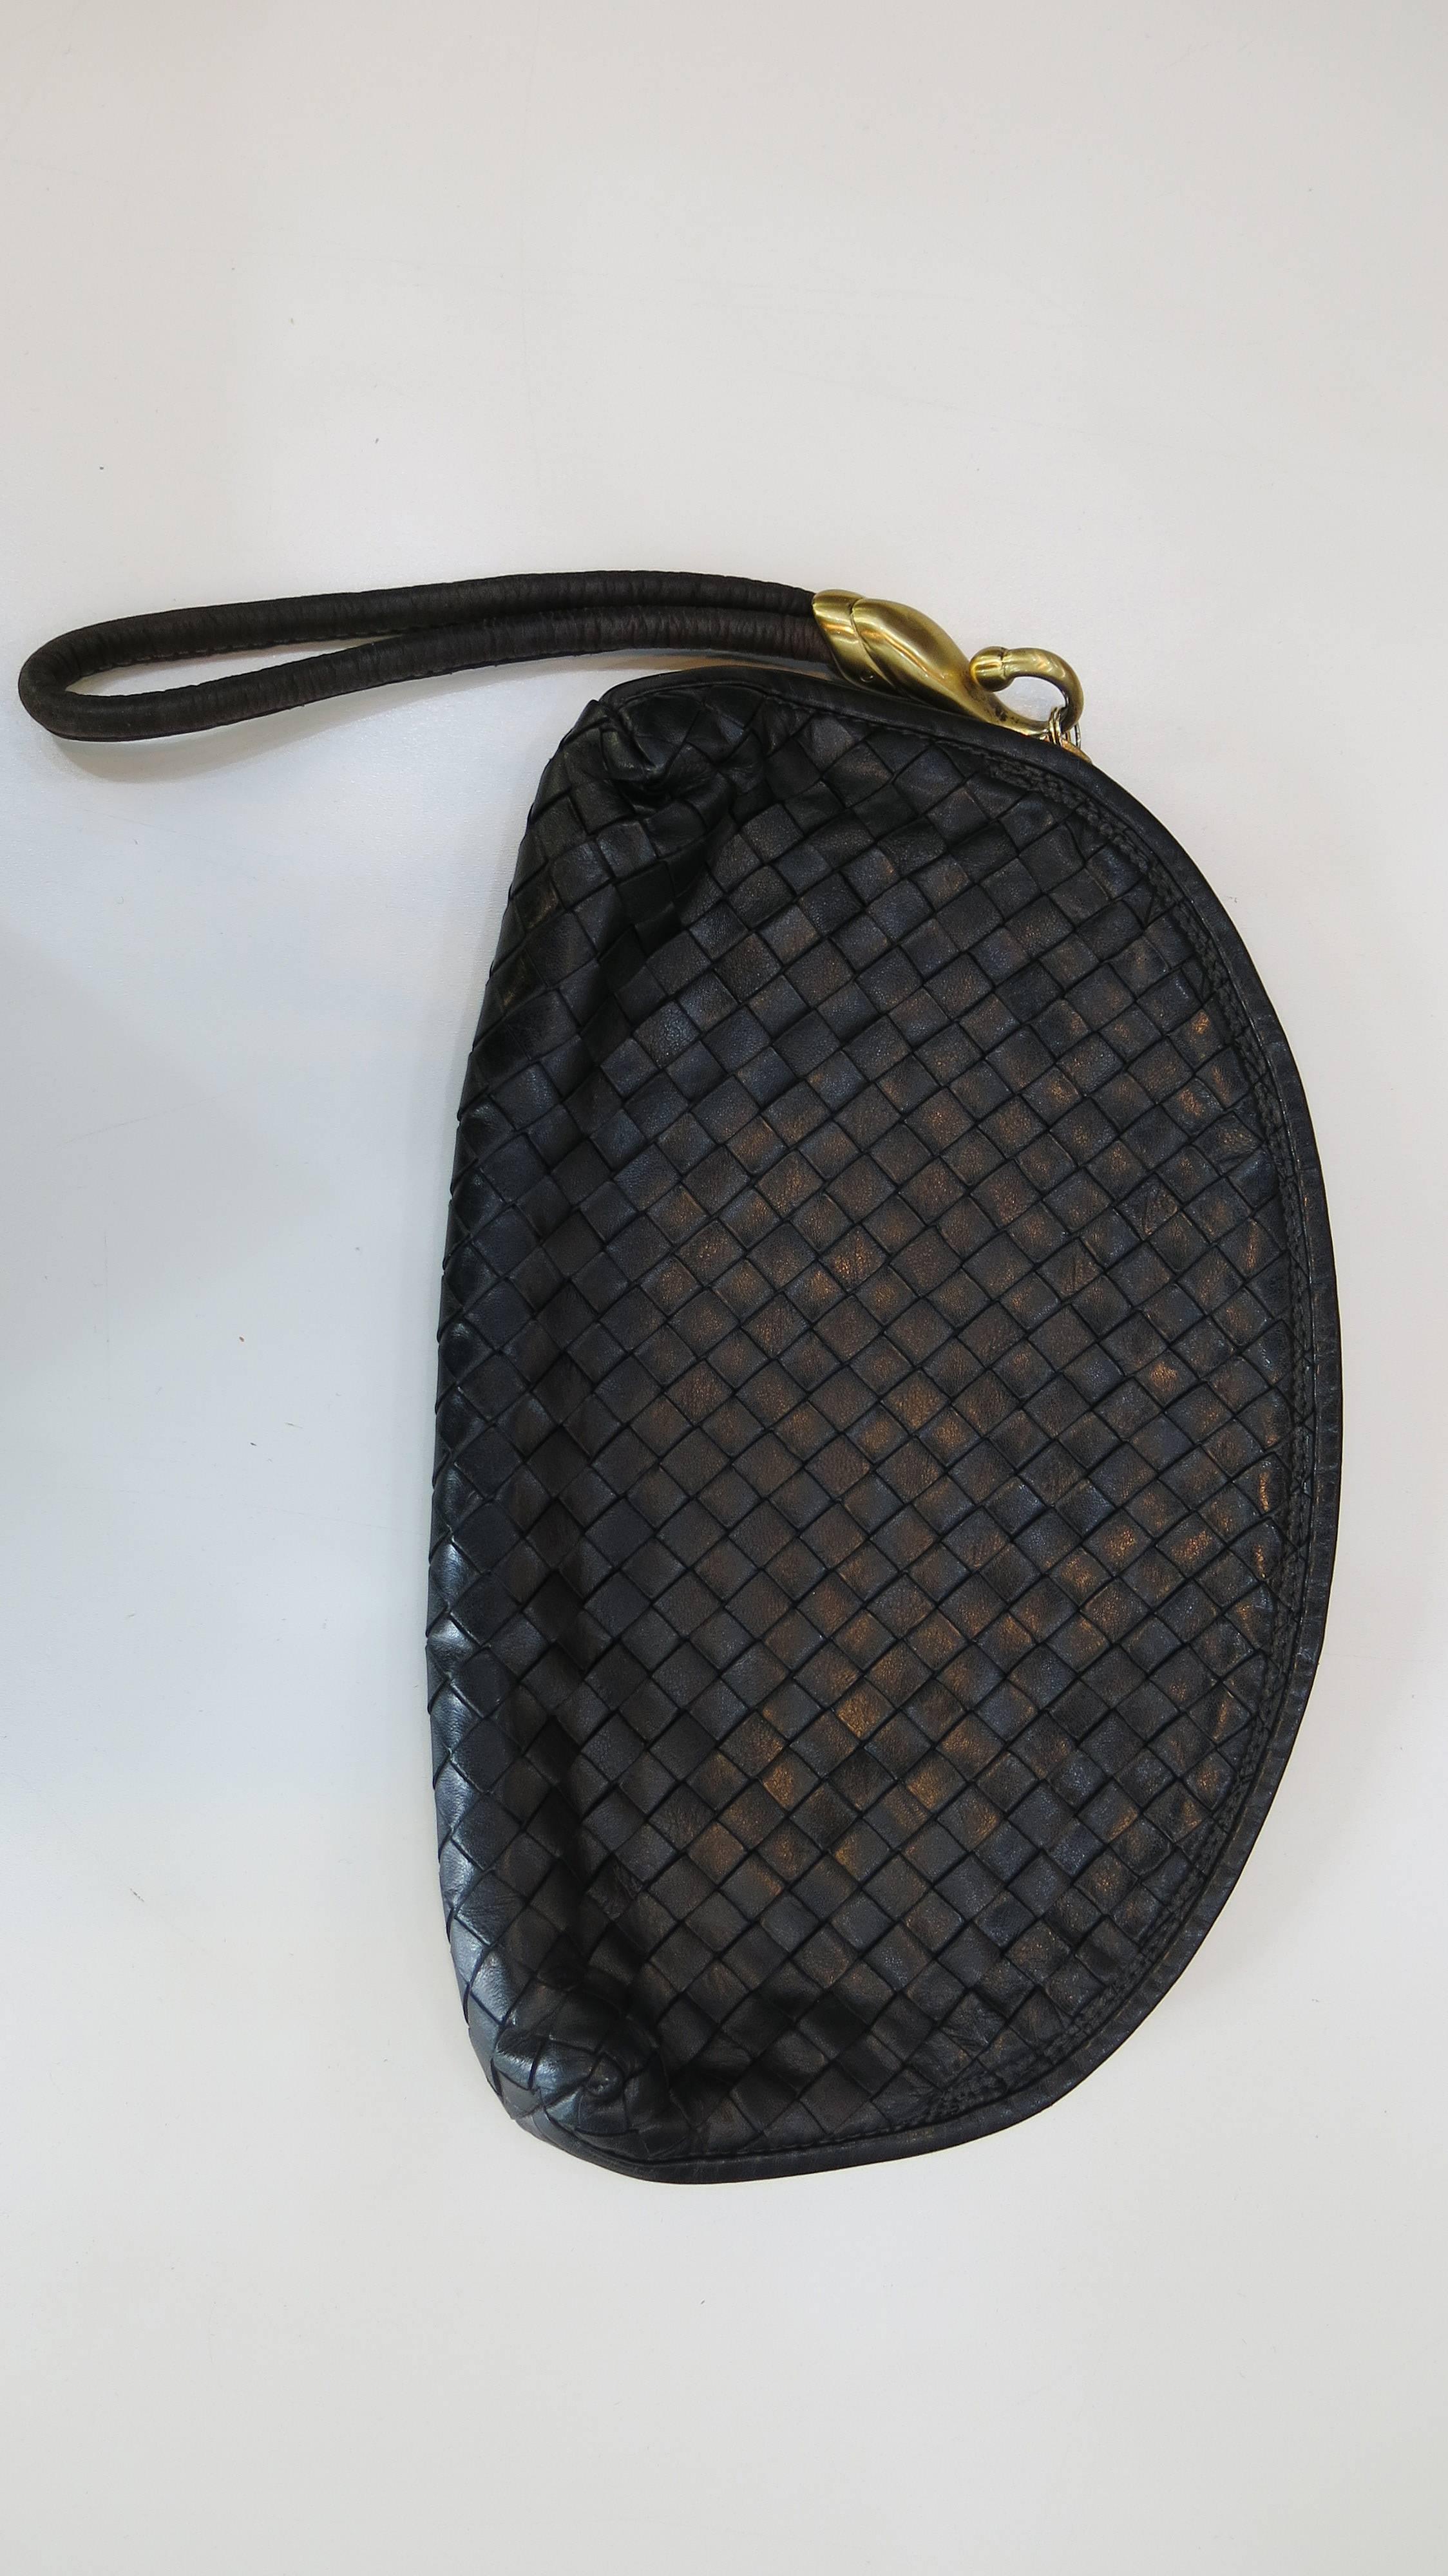 Black woven leather Bottega Veneta clutch. The bag appears virtually unused and features an inner zip pocket and an oversized leather pull as well as brass toned hardware. A classic night/day bag. The perfect size to carry the essentials and a